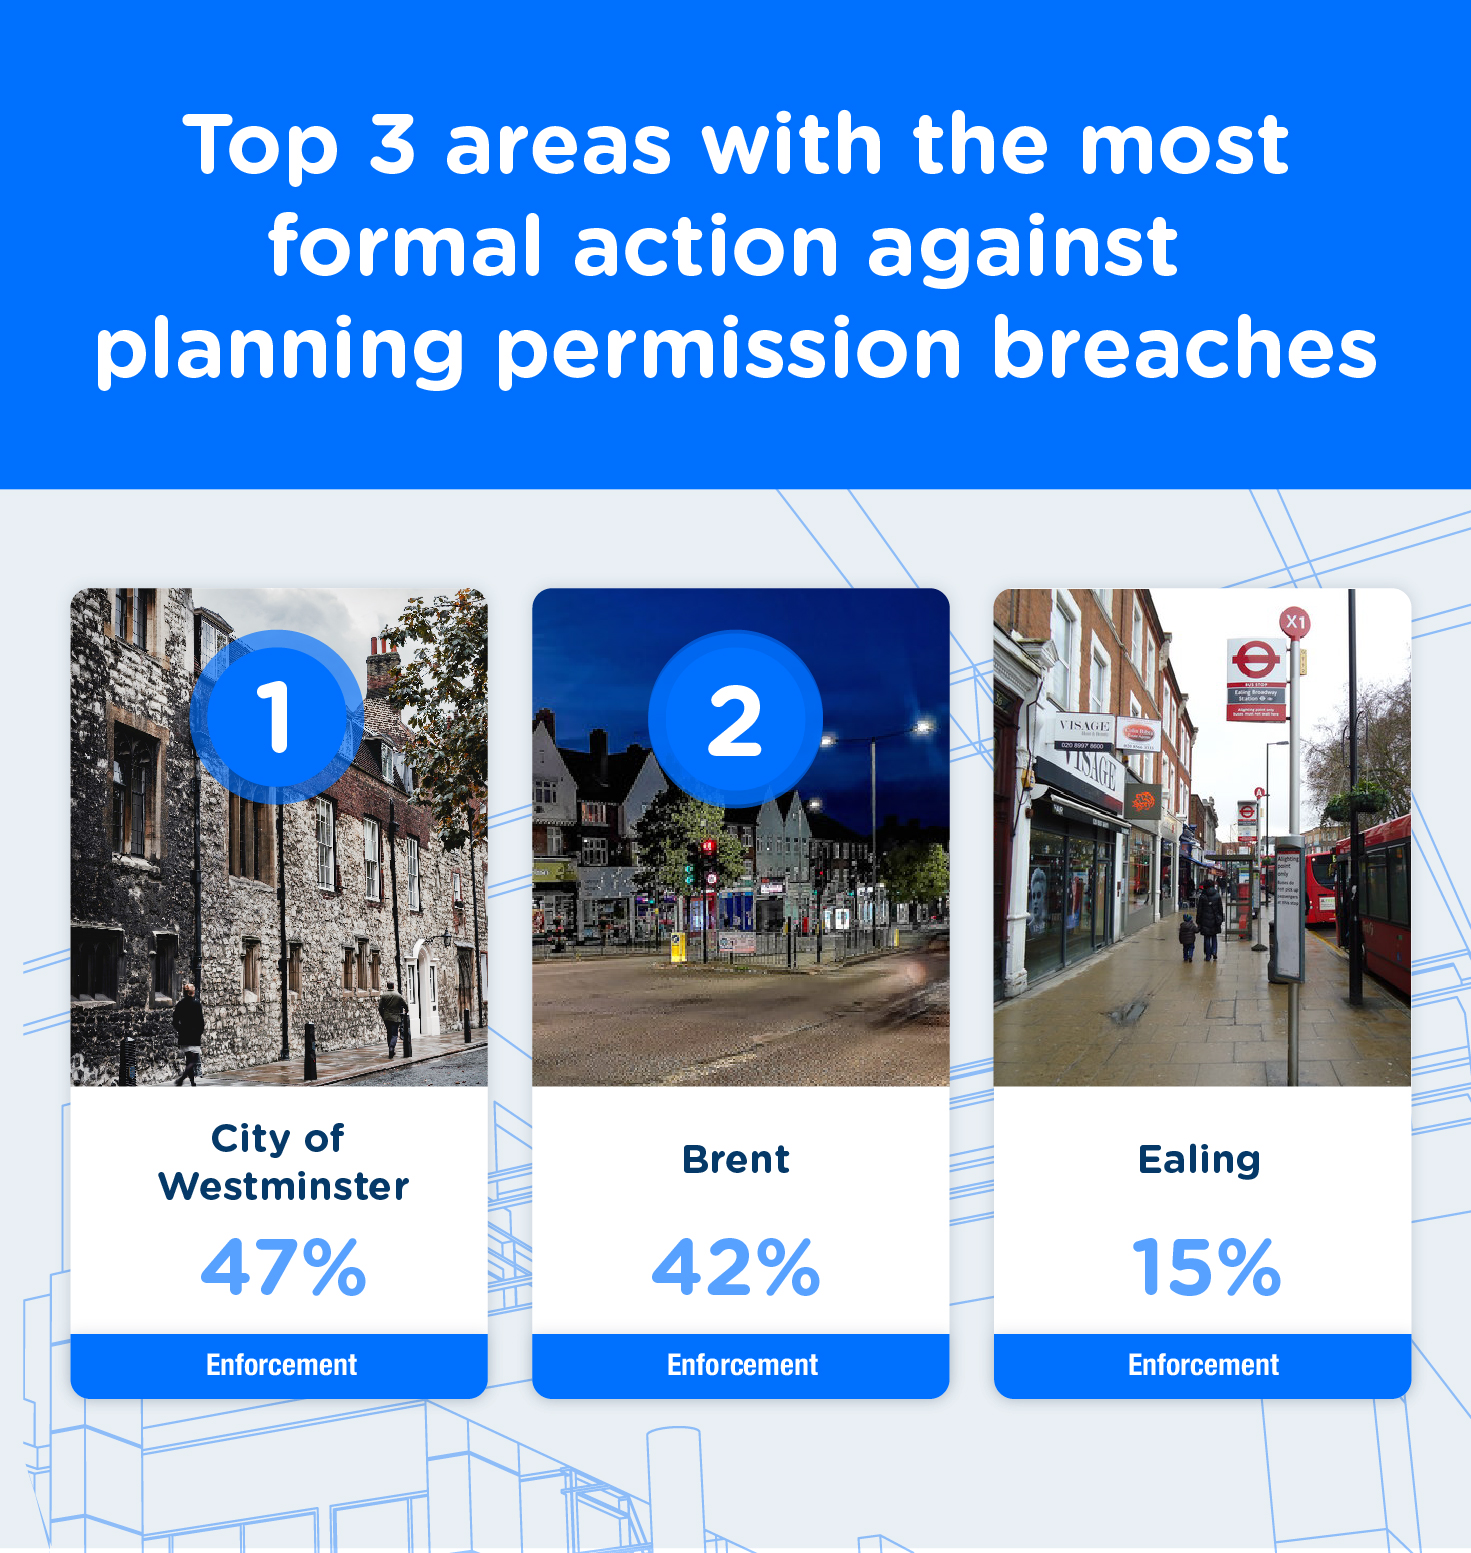 getagent-planningbreaches 06 - Top 3 formal action